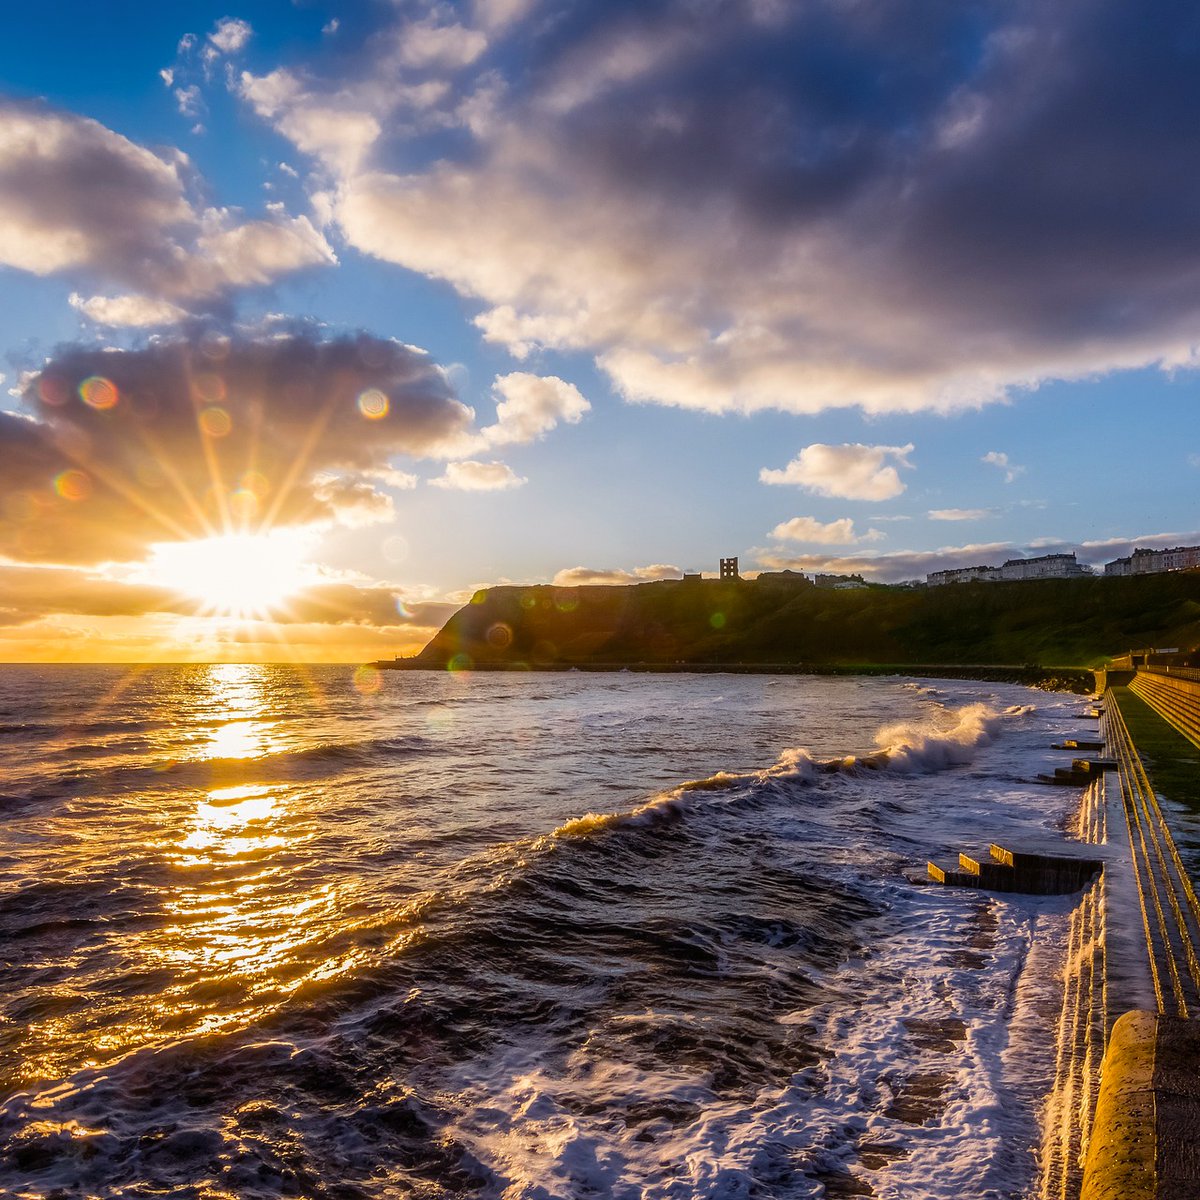 Scarborough - Home...

North Yorkshire has it all, sandy beaches, ancient castles, glorious forests and every version of the weather you can imagine!

--------

Photo by Tim Hill

#NorthYorkshire #Scarborough #SeaView #MorningSkies #Saturday #BeachVibes